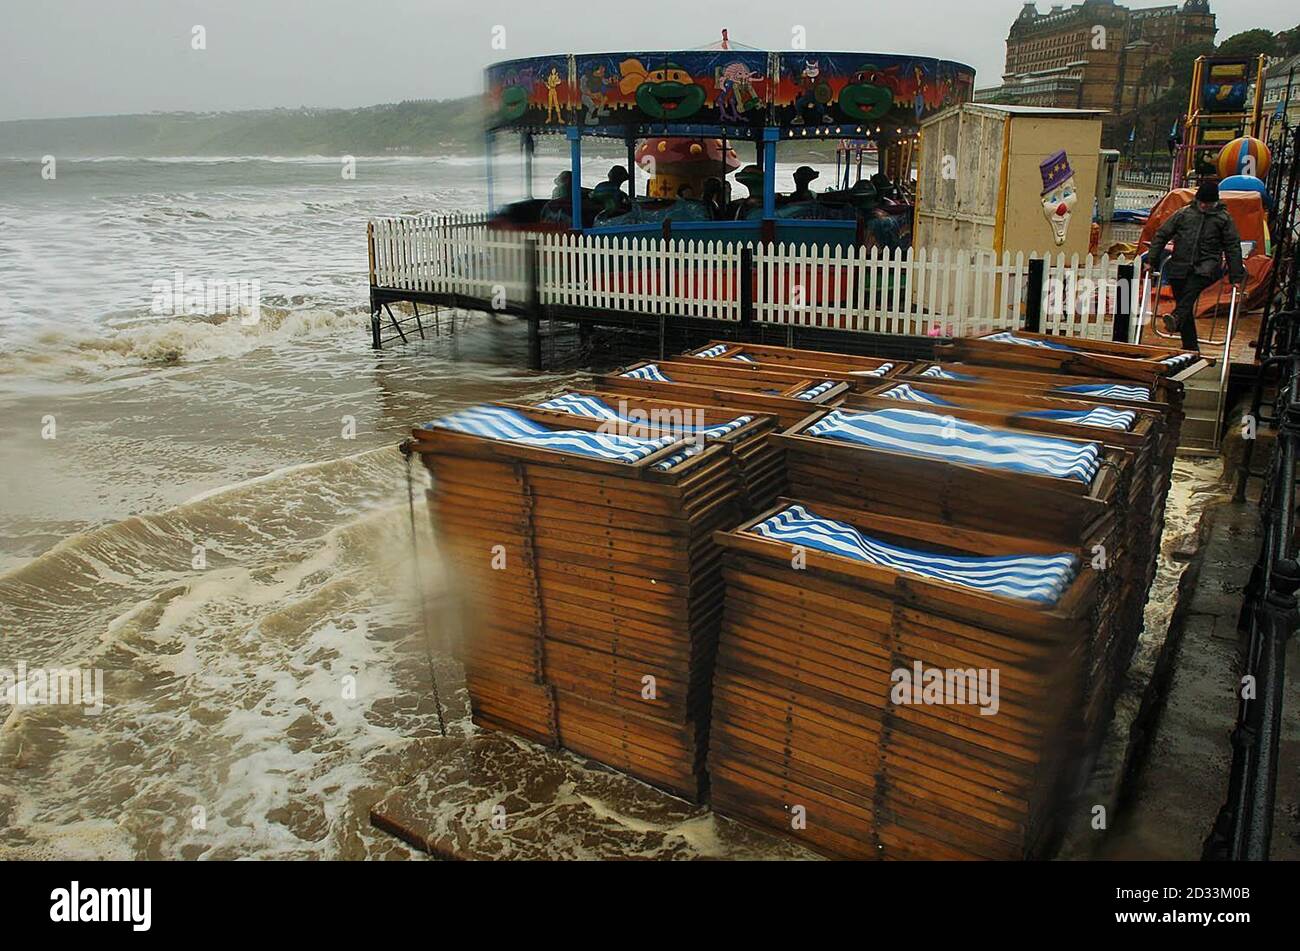 The piles of deckchairs and seafront amusement arcades are short of customers, as gale force winds, high tides and torrential rain pound the beach at Scarborough. As the UK recovers from some of the worst summer storms on record, thousands of homes were still without electricity. Stock Photo